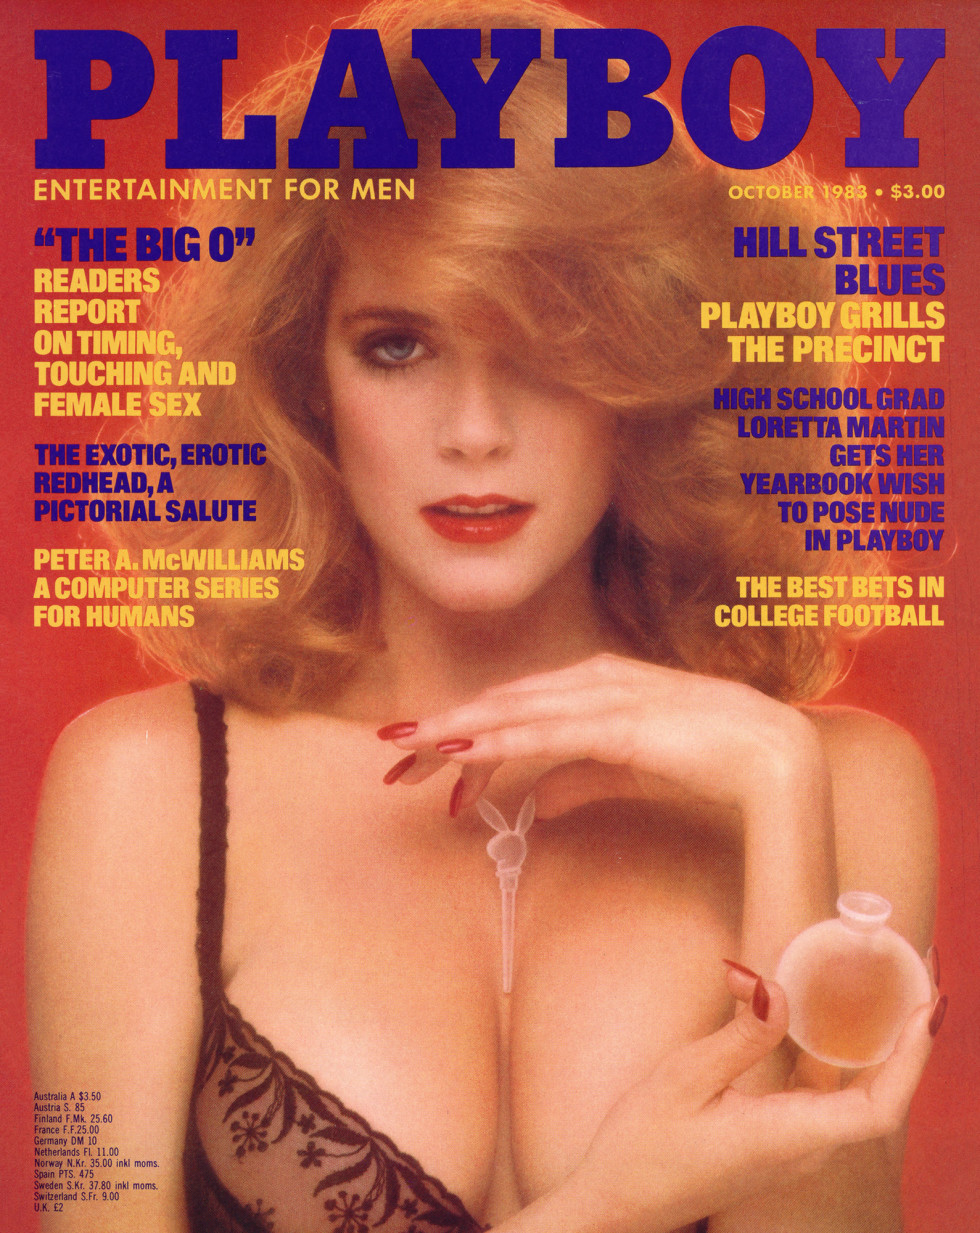 Play Boy For Sex Mom - 7 Playboy Bunnies Recreate Their Iconic Covers 30 Years Later - VICE